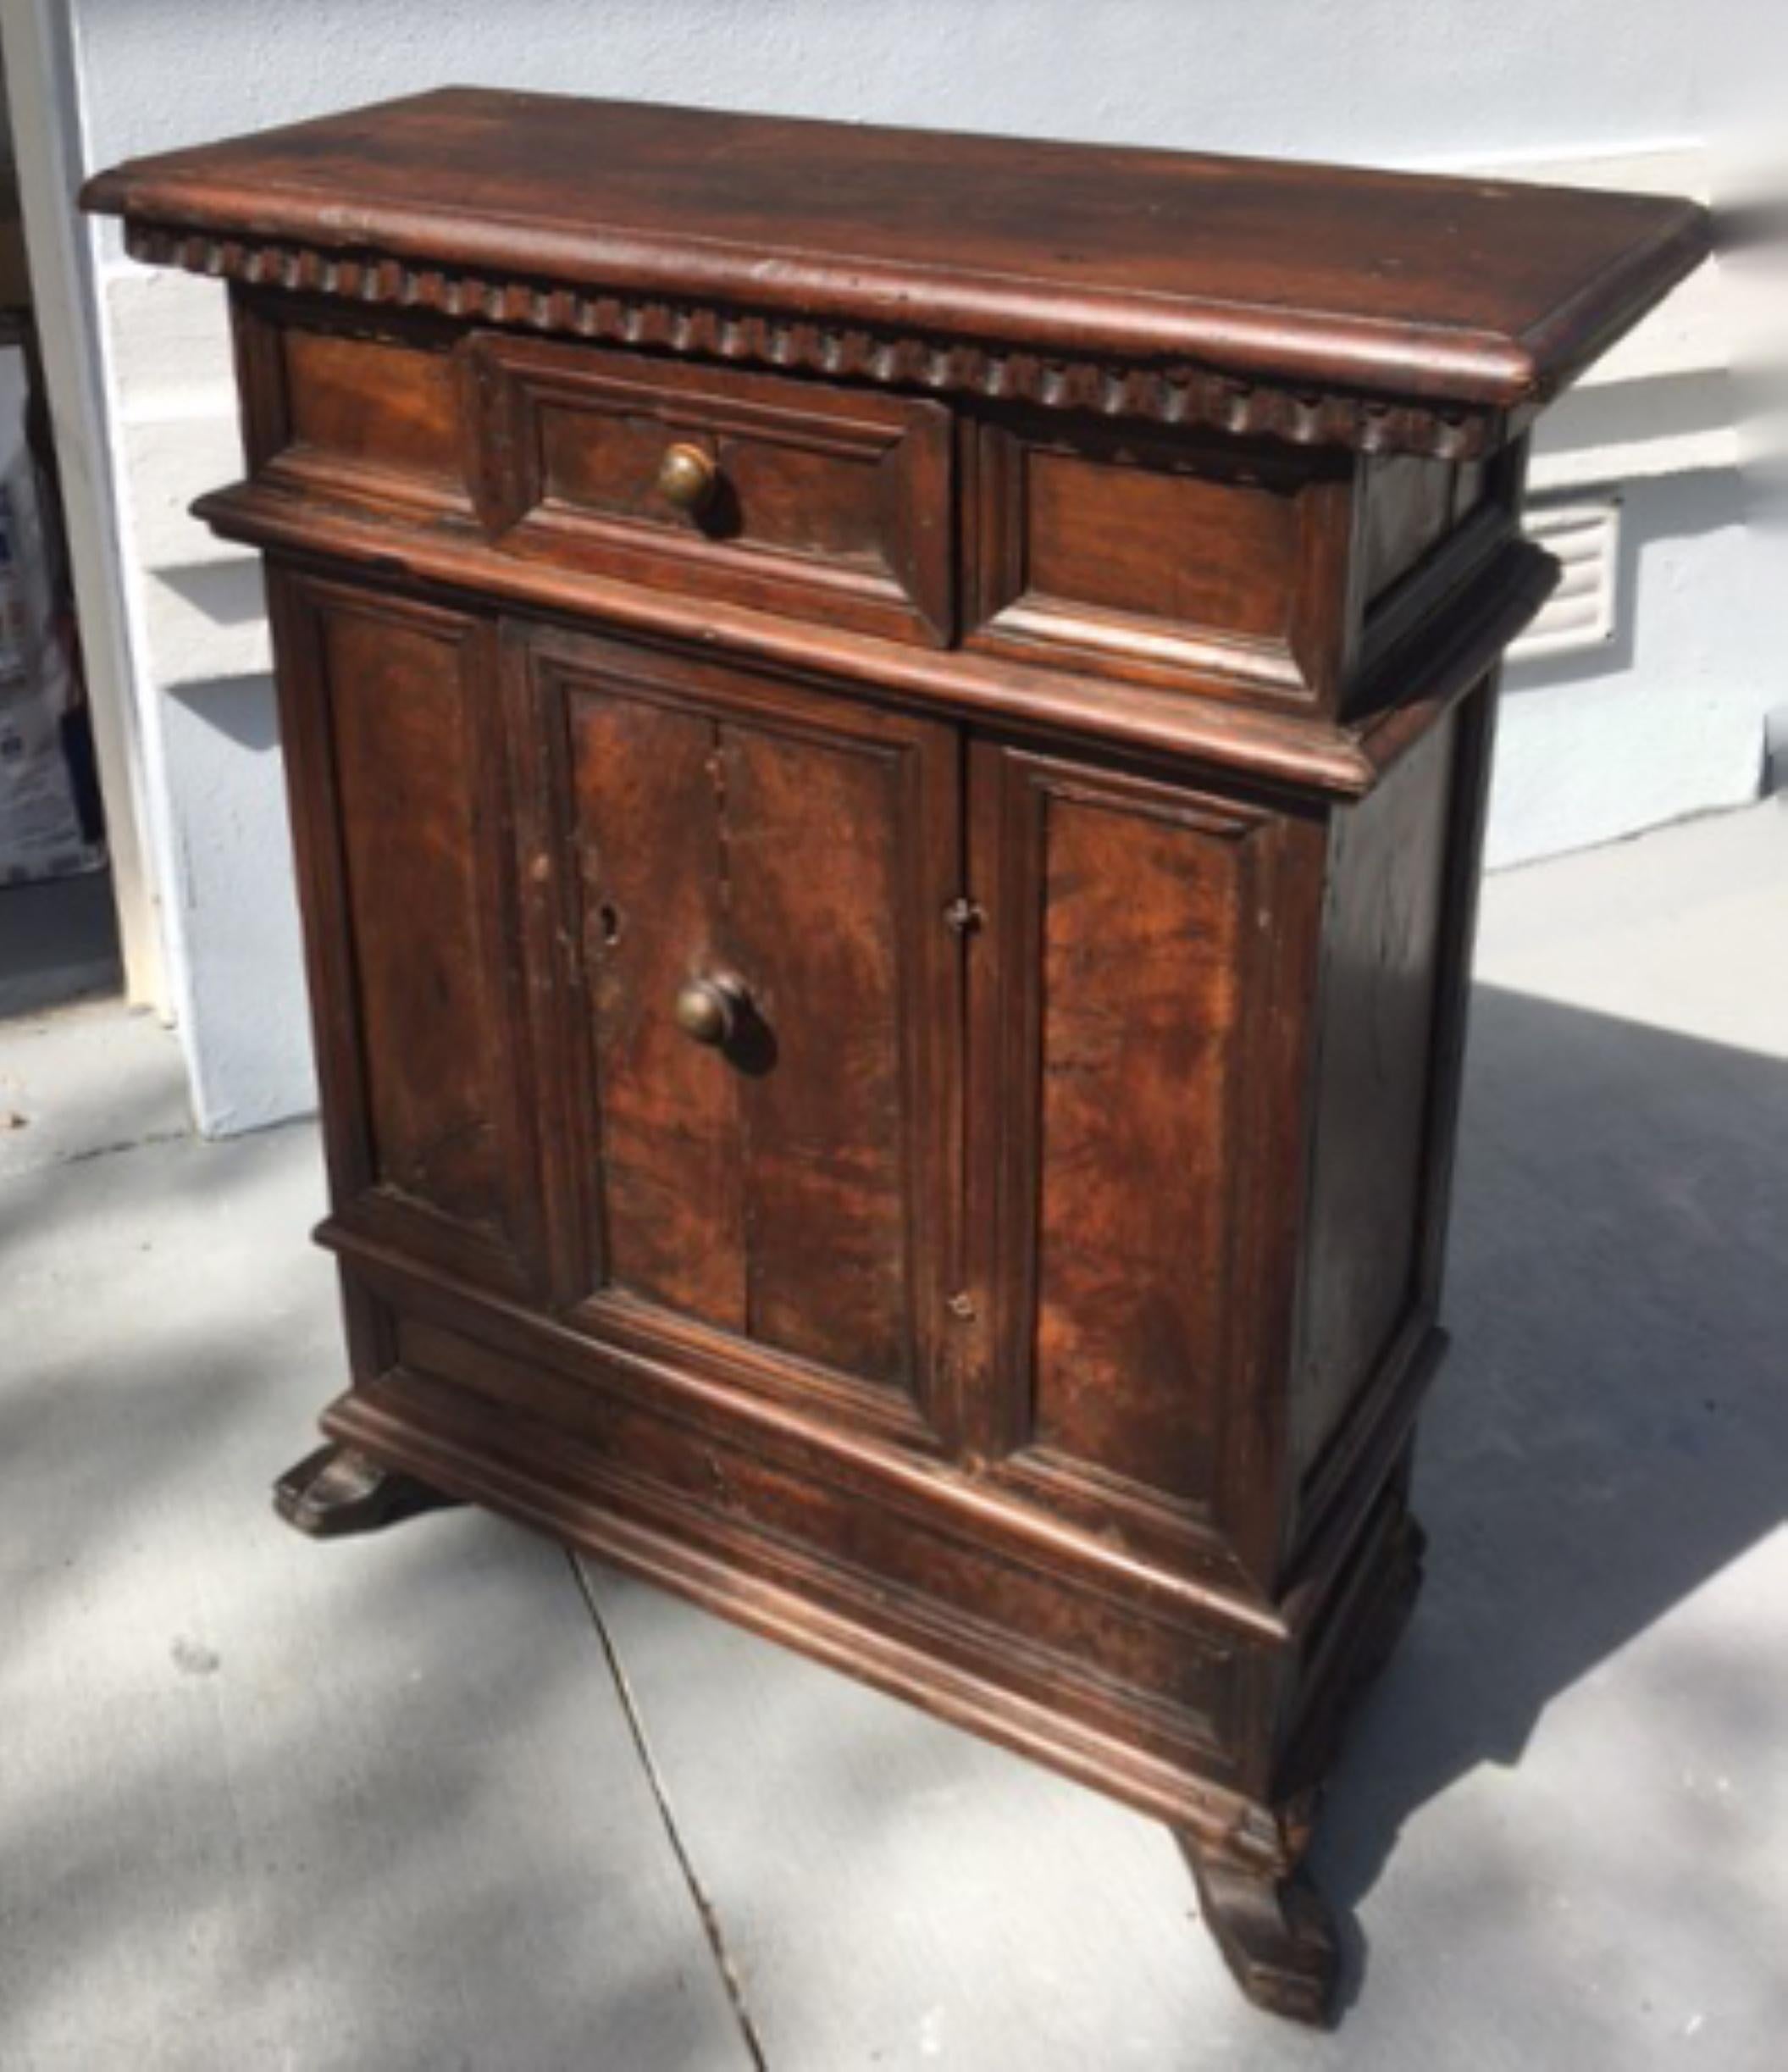 16th Century Period Renaissance Tuscan Walnut Credenzino

Italian 16th/17th century Renaissance walnut small Credenza with a rectangular top above a single drawer centered over a single door. This outstanding Tuscan cabinet of a solid structure is